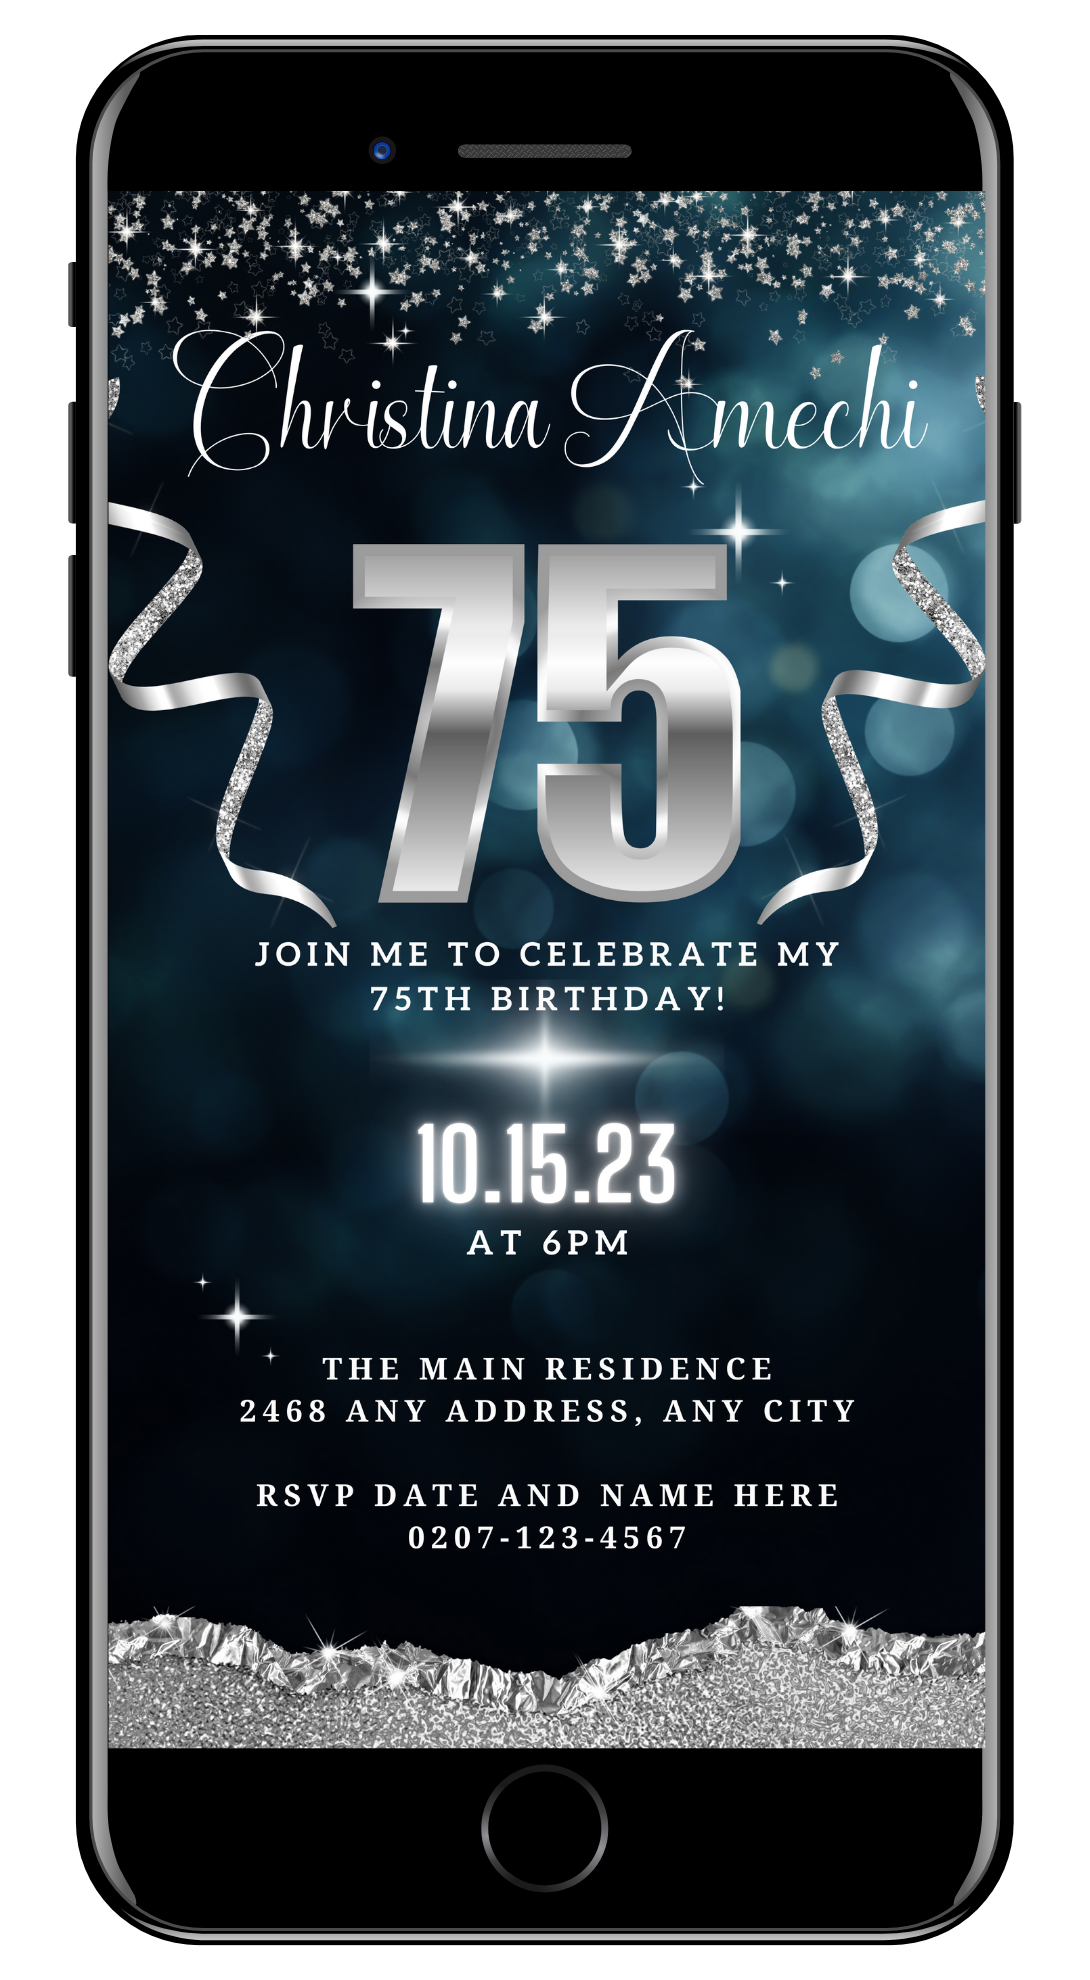 Customizable Navy Blue Silver Glitter 75th Birthday Evite displayed on a smartphone screen, featuring editable text and decorative elements for a personalized invitation.